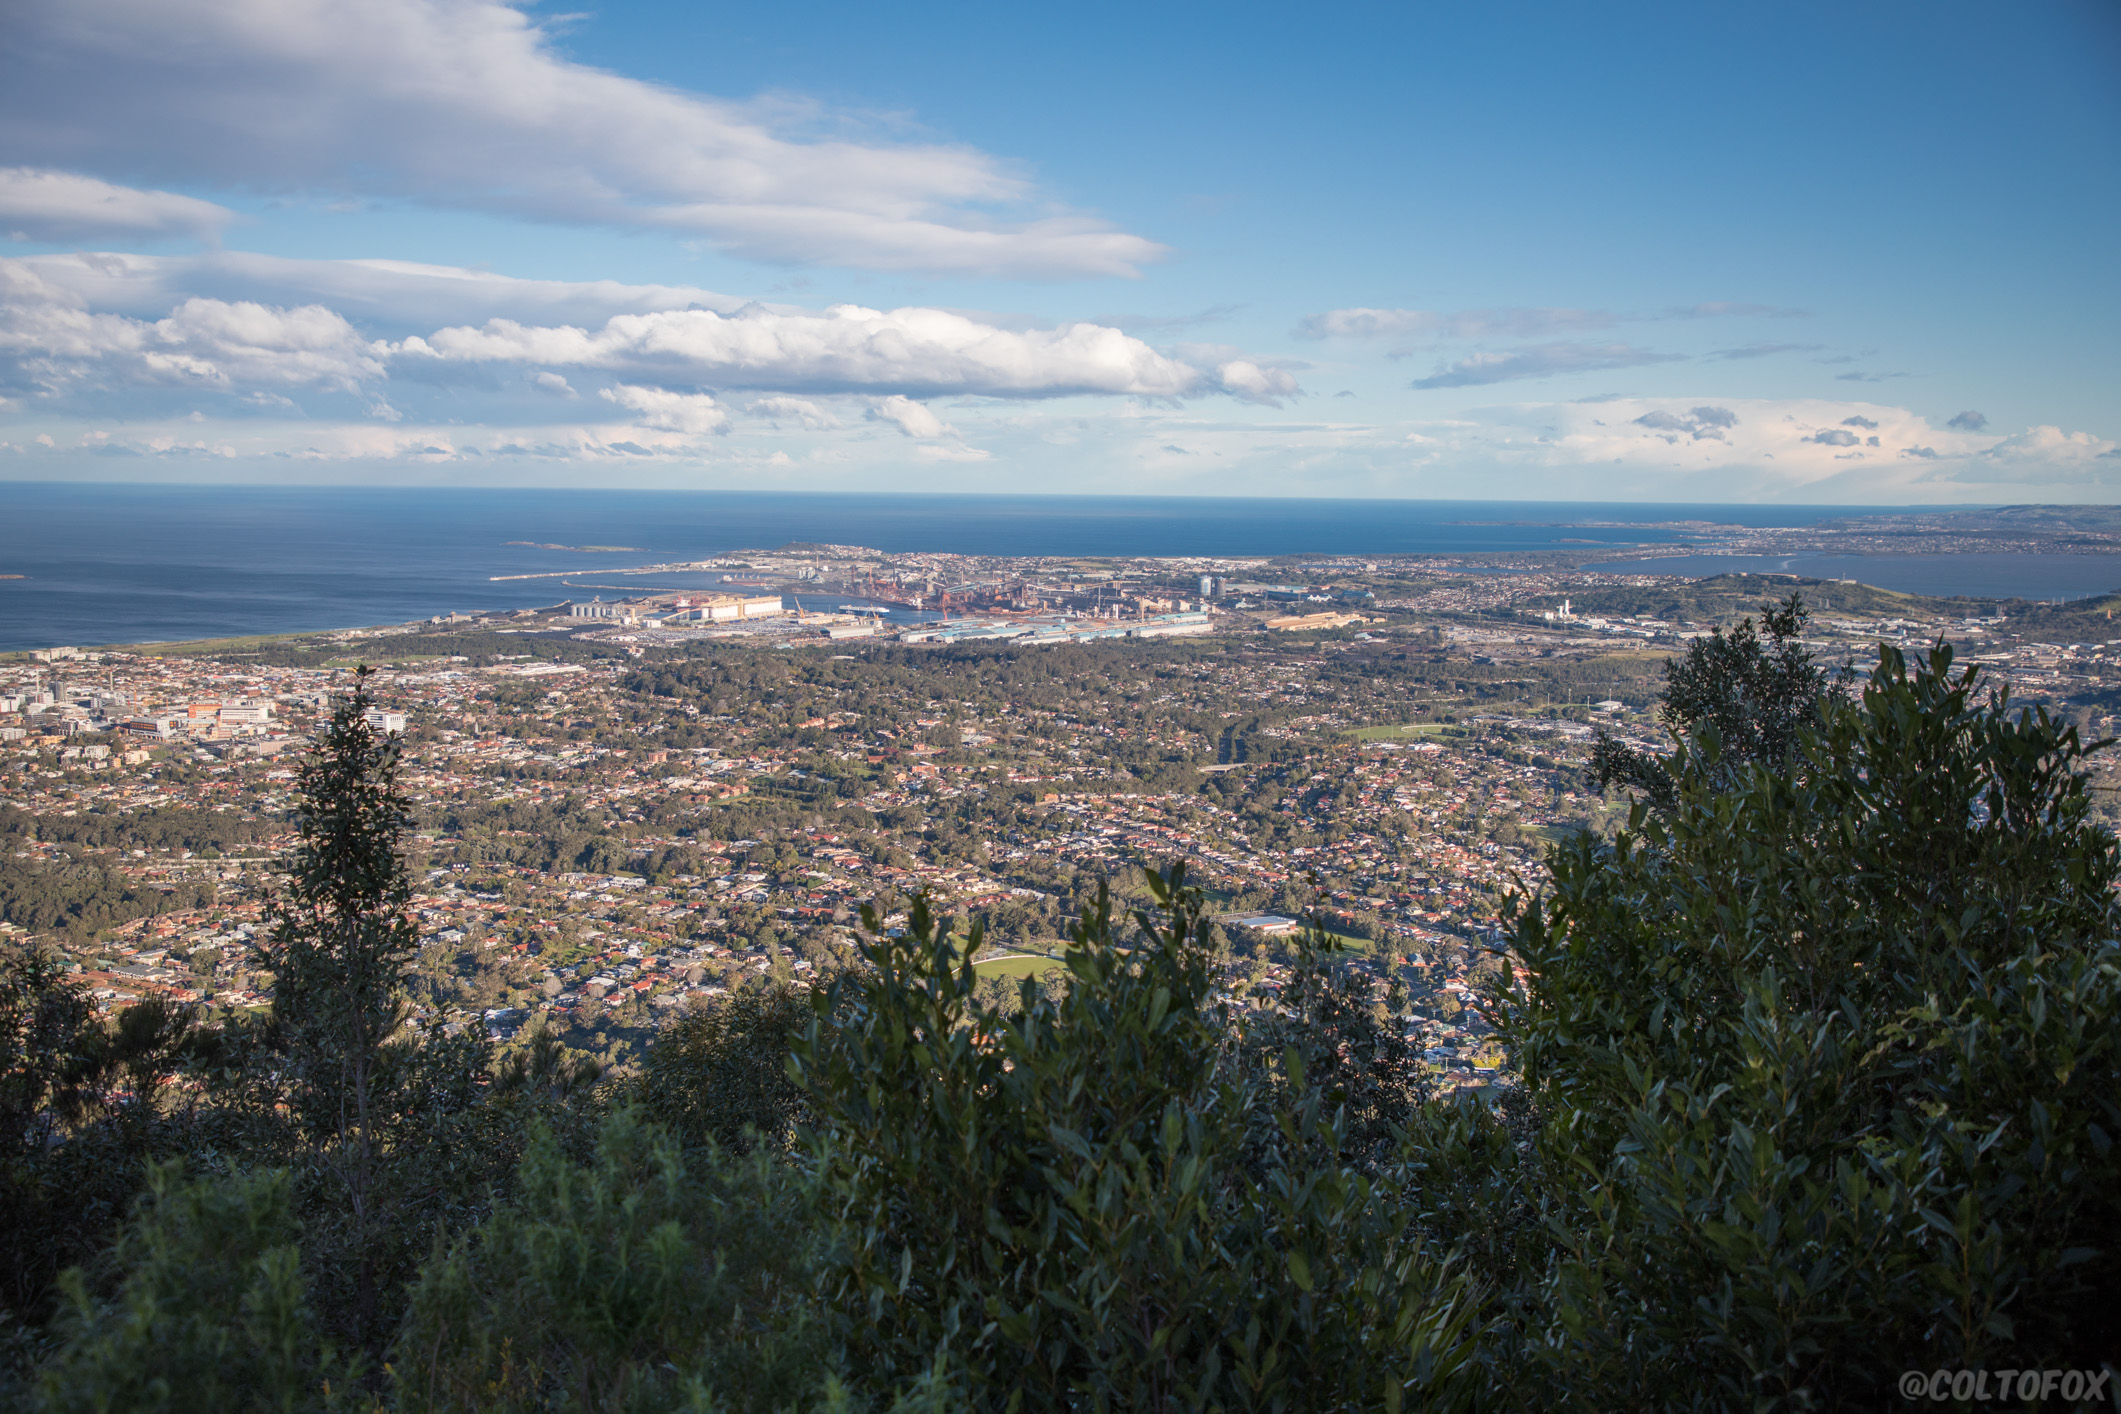 Mt Keira Lookout